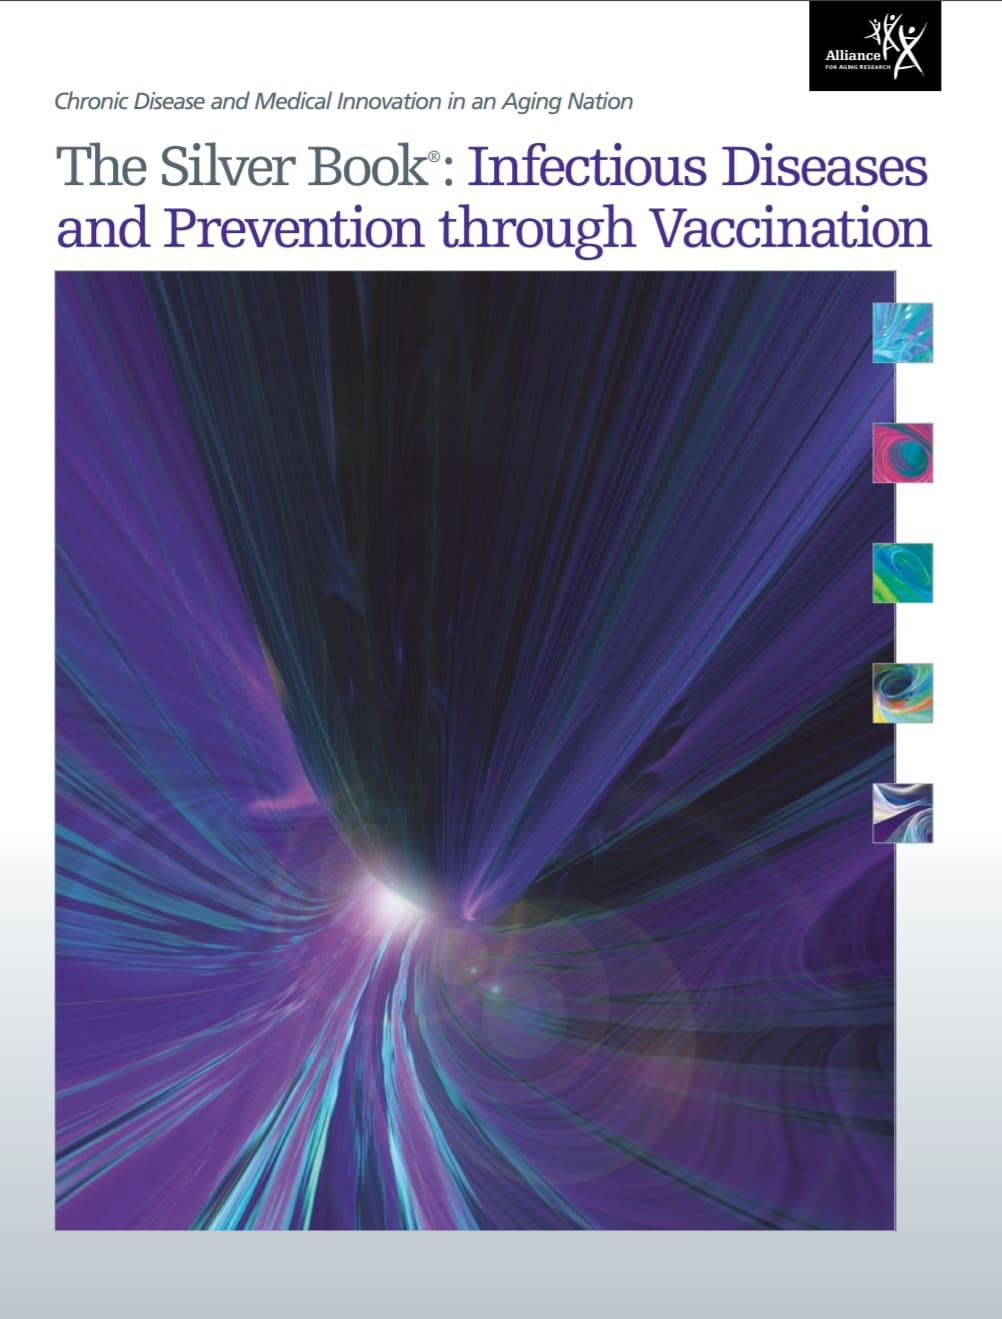 Cover of "The Silver Book" on infectious disease vaccination.